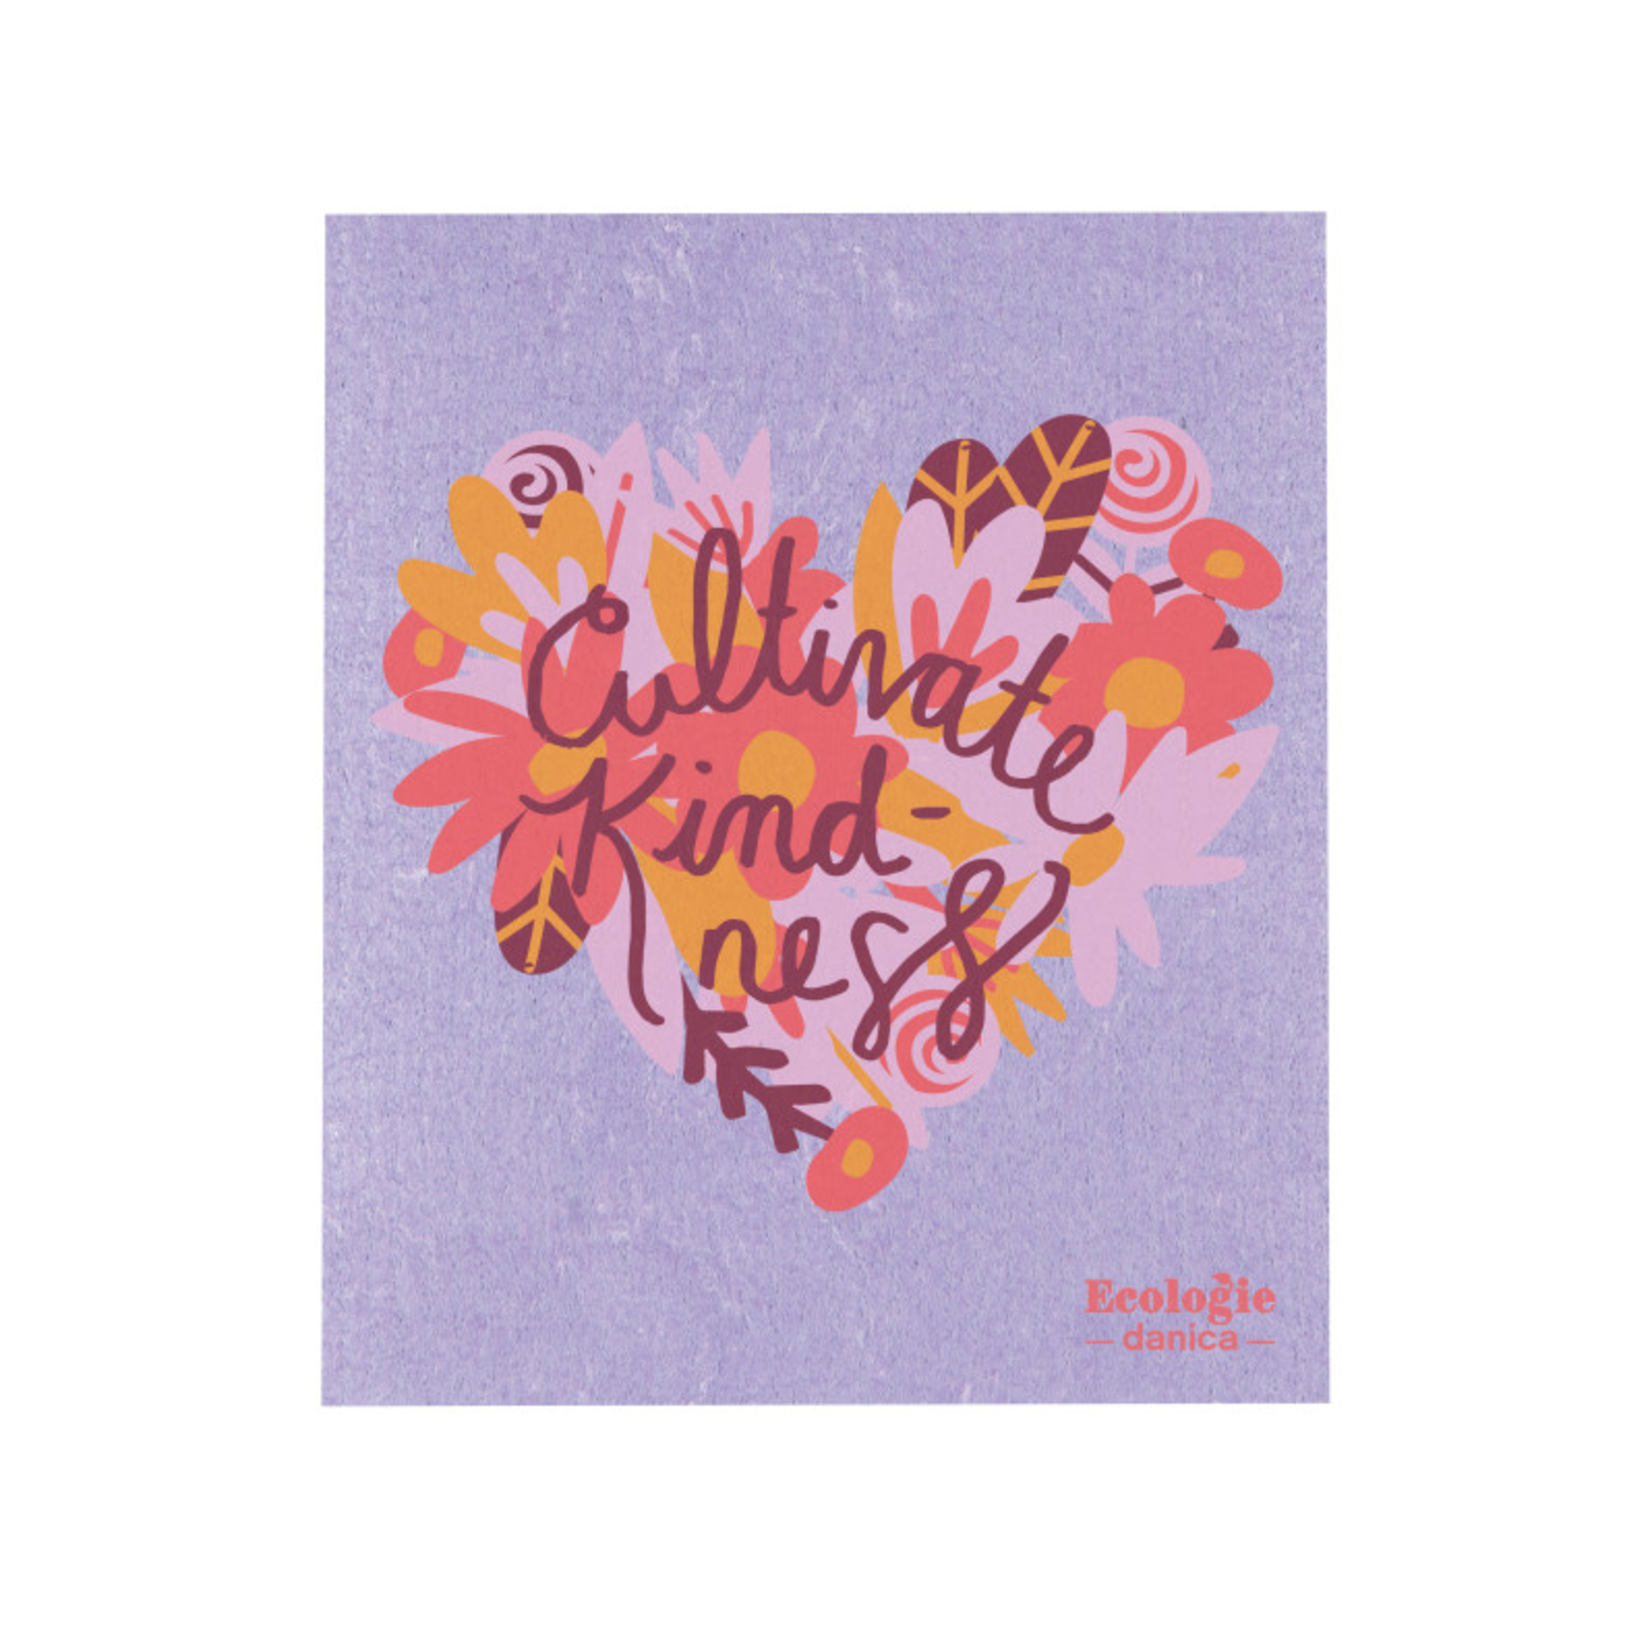 Now Designs Swedish Dishcloth - Cultivate Kindness